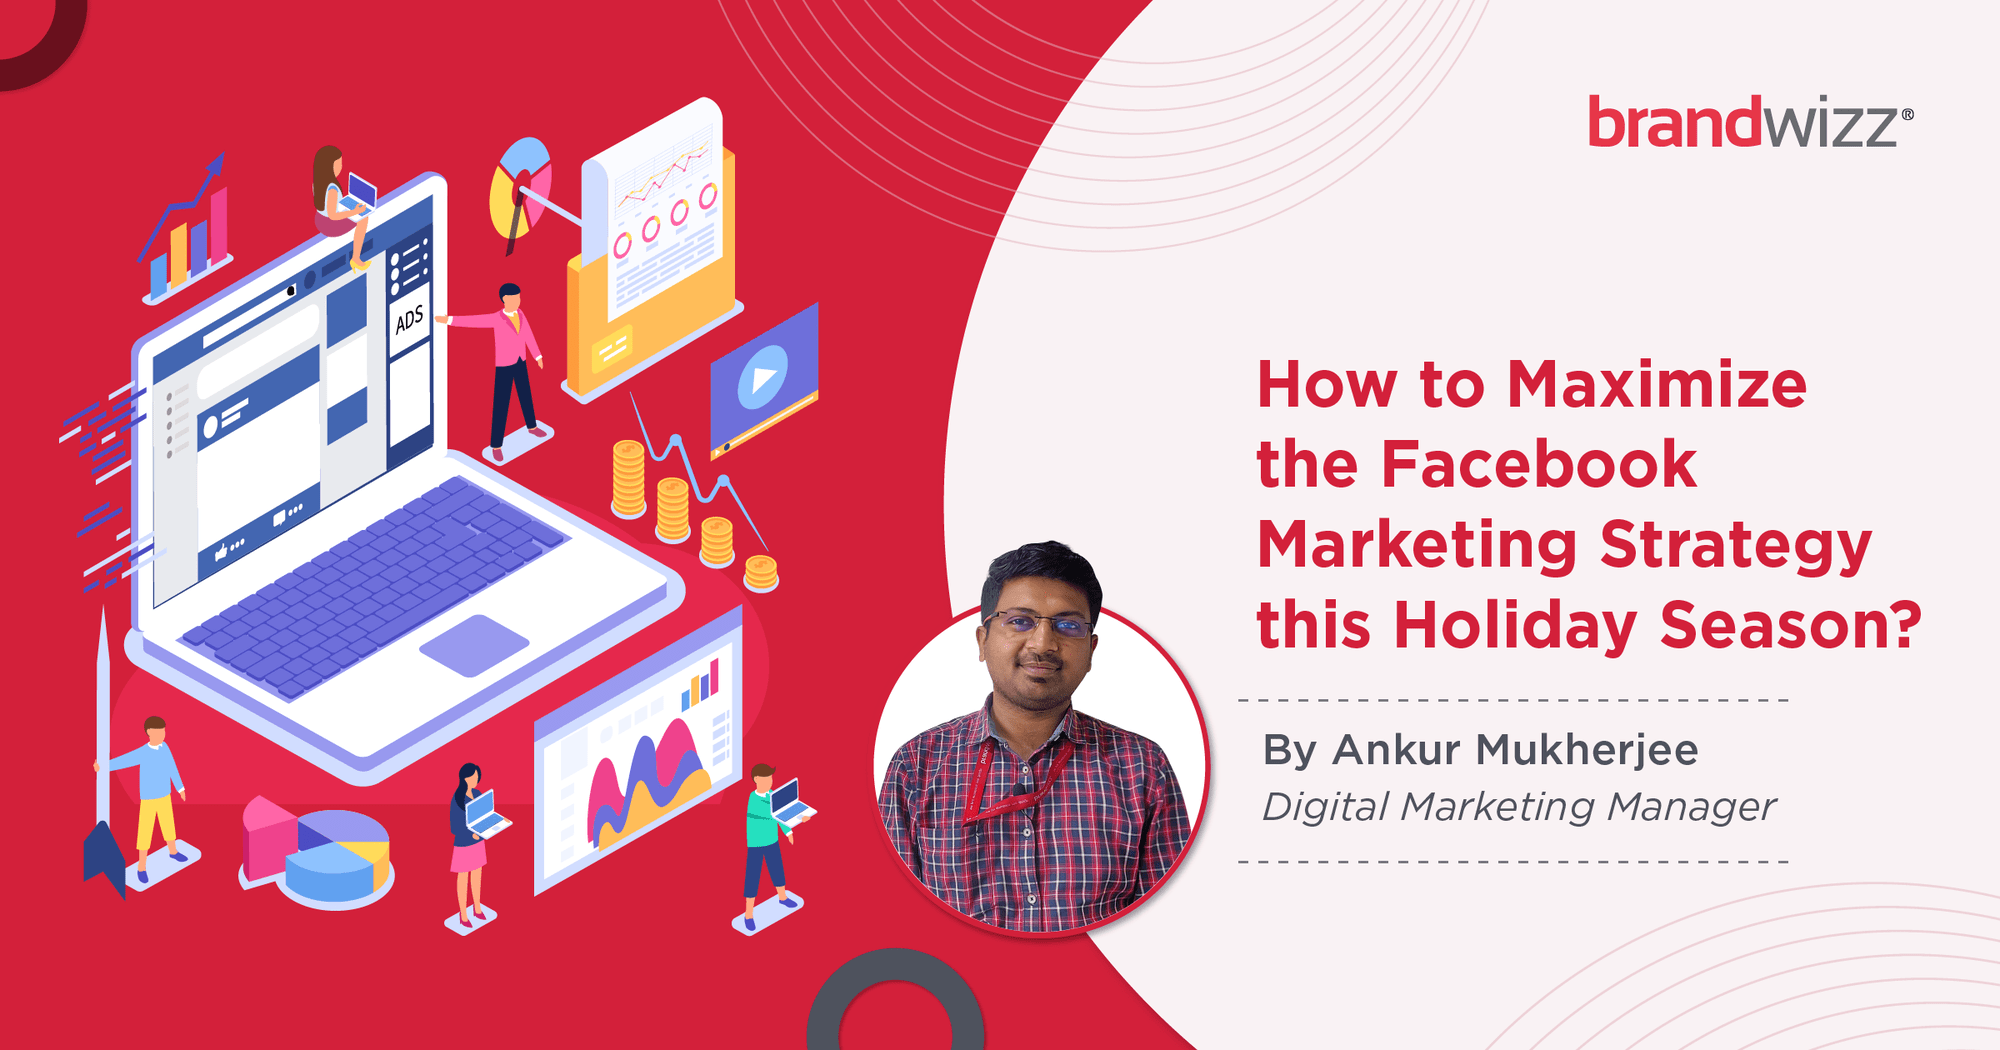 How to Maximize the Facebook Marketing Strategy this Holiday Season?